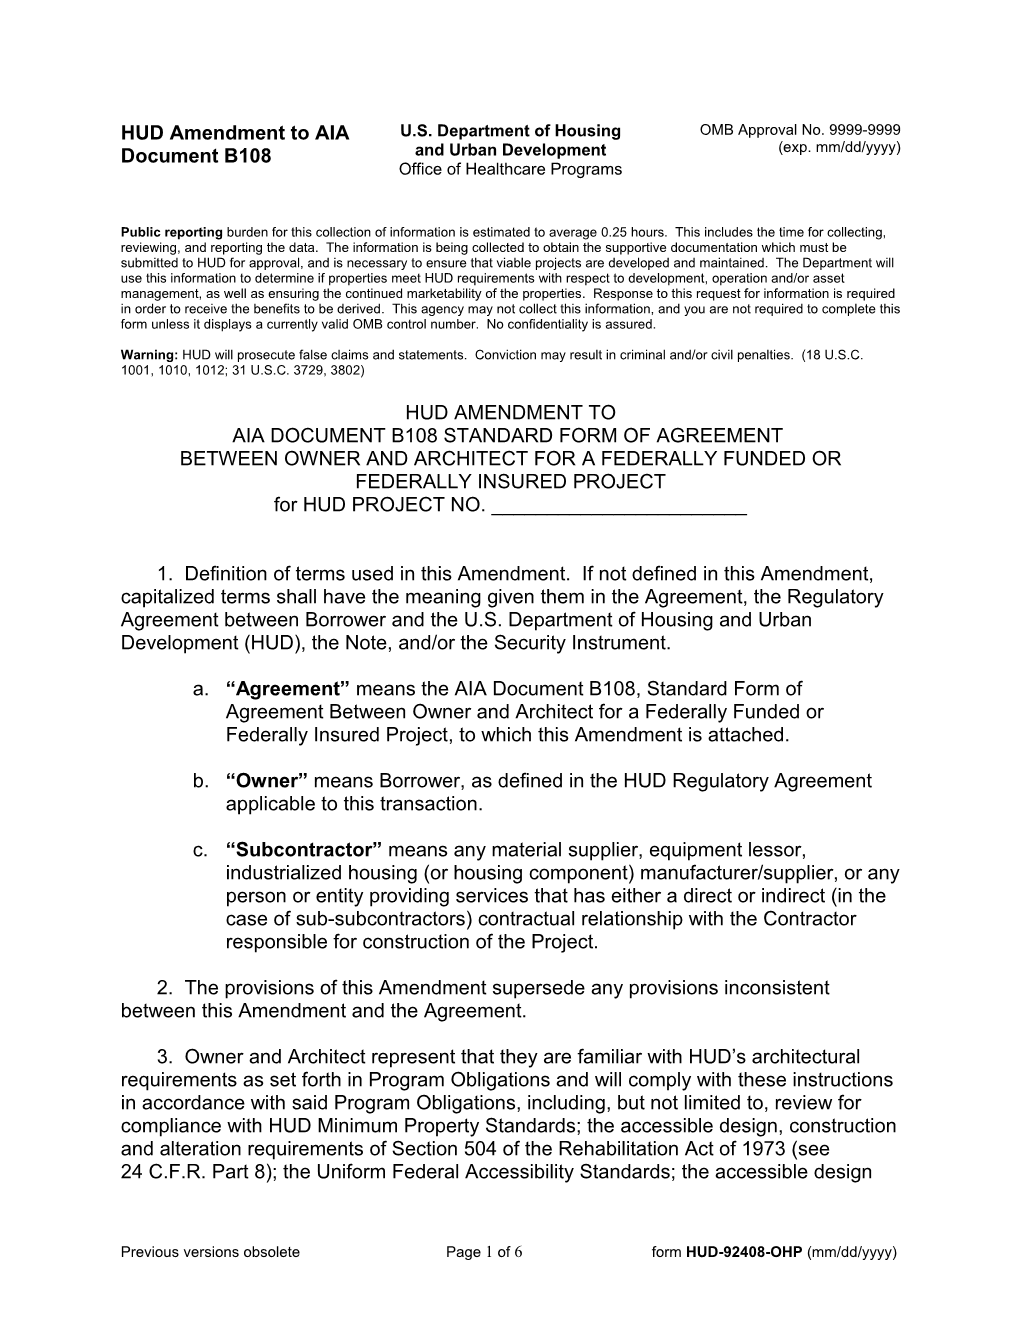 Aia Document B108 Standard Form of Agreement